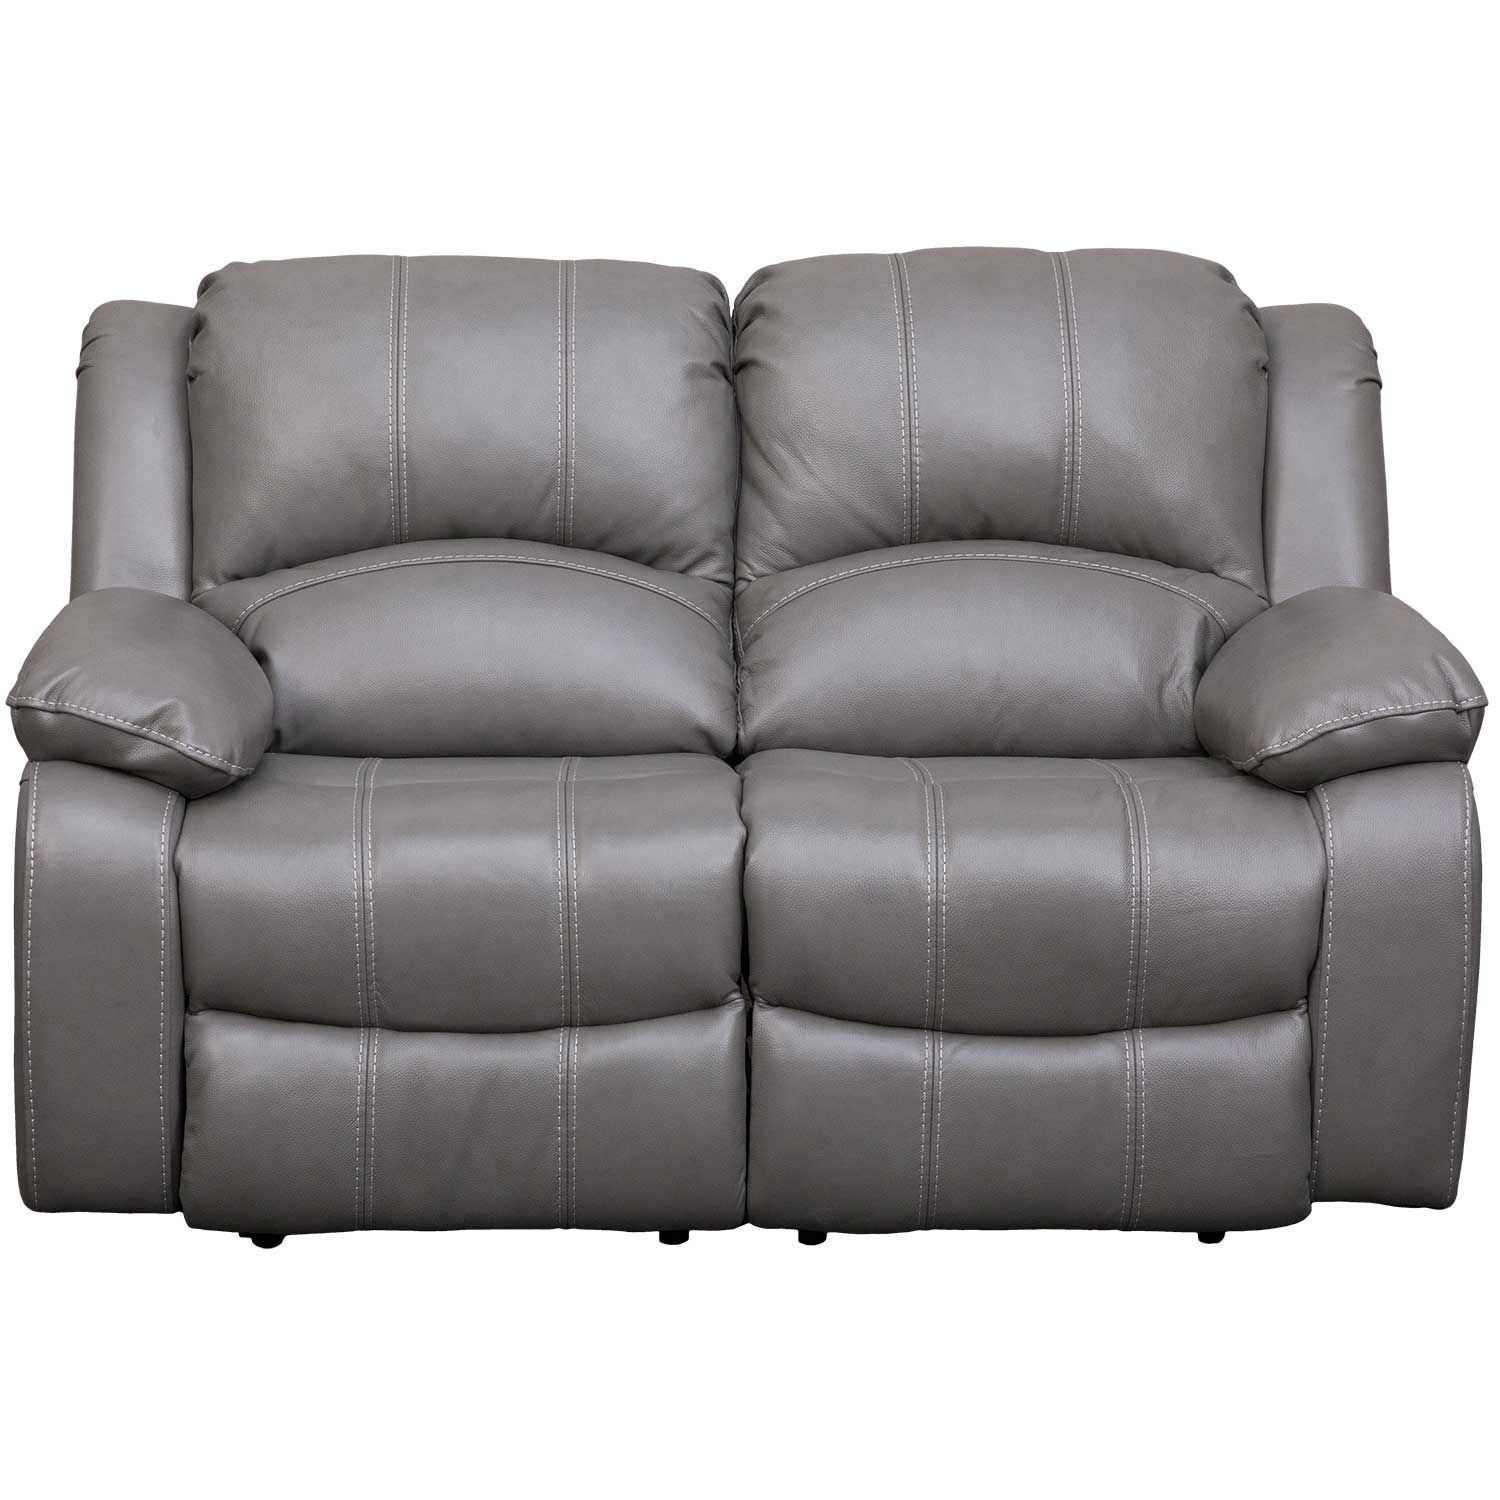 Furniture of America Grants 69.5 in. Light Brown Leather 2-Seater Power Recliner Loveseat, Light Brown Without Care Kit